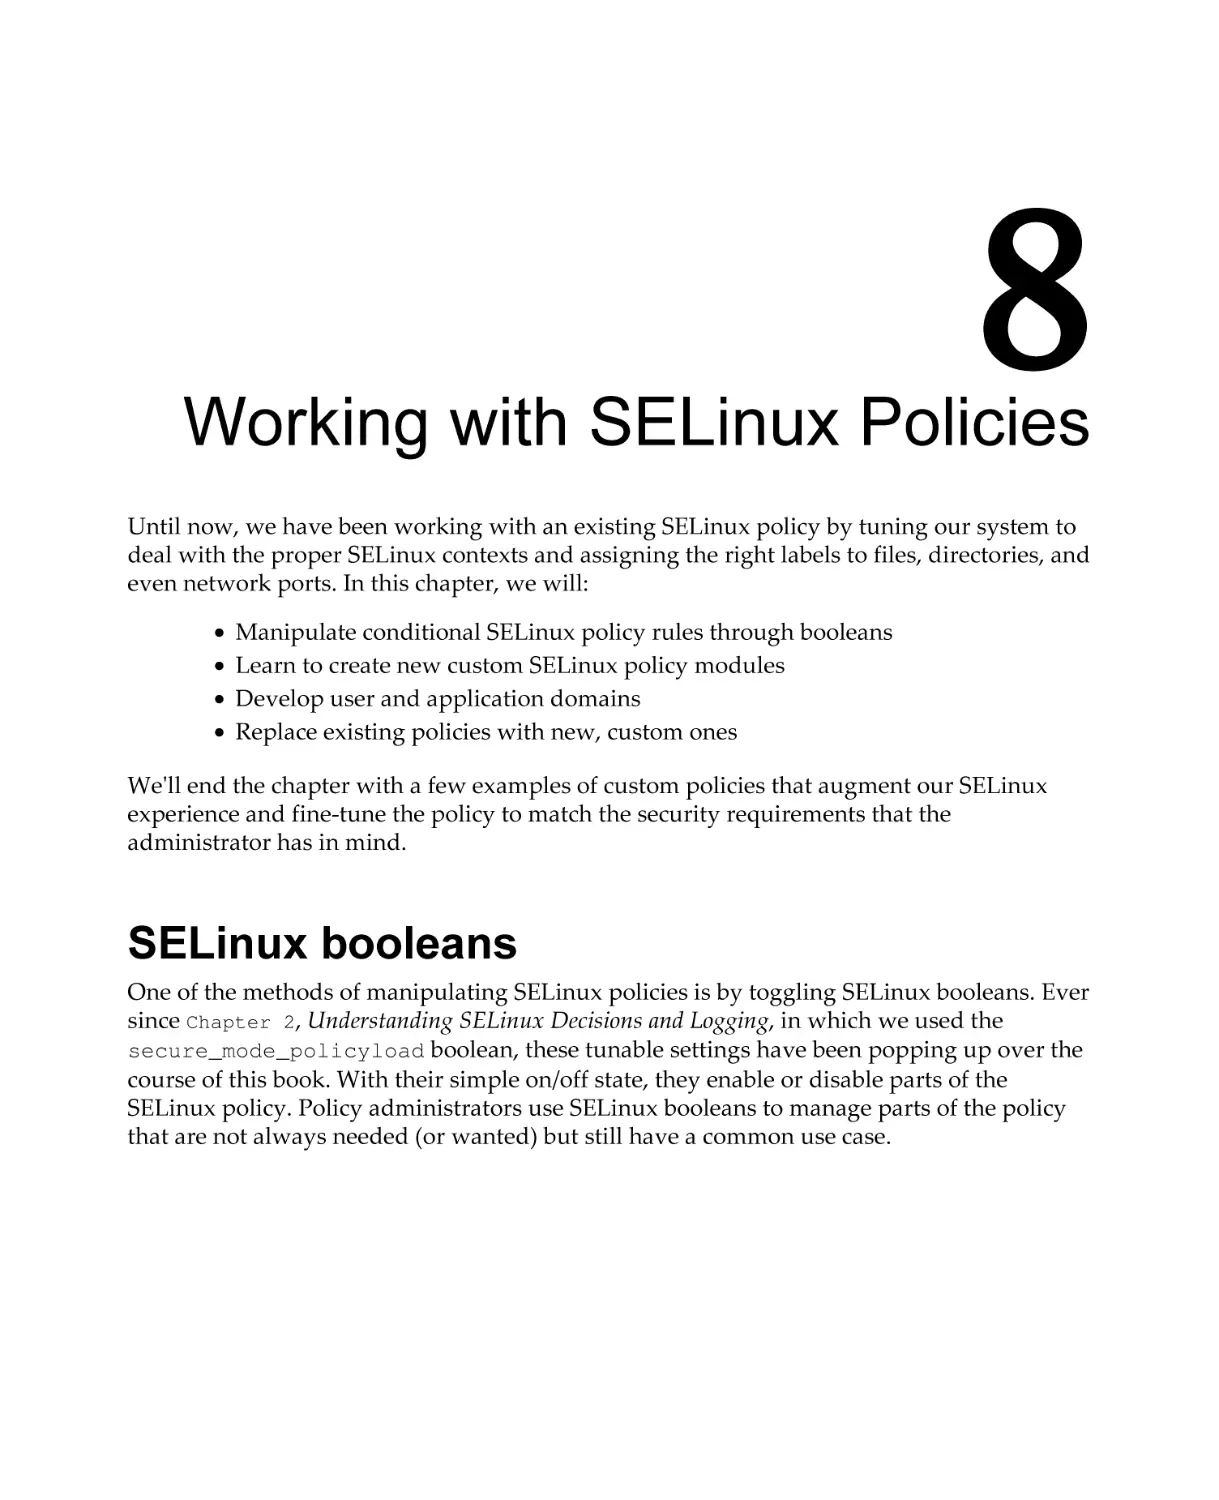 Chapter 8
SELinux booleans